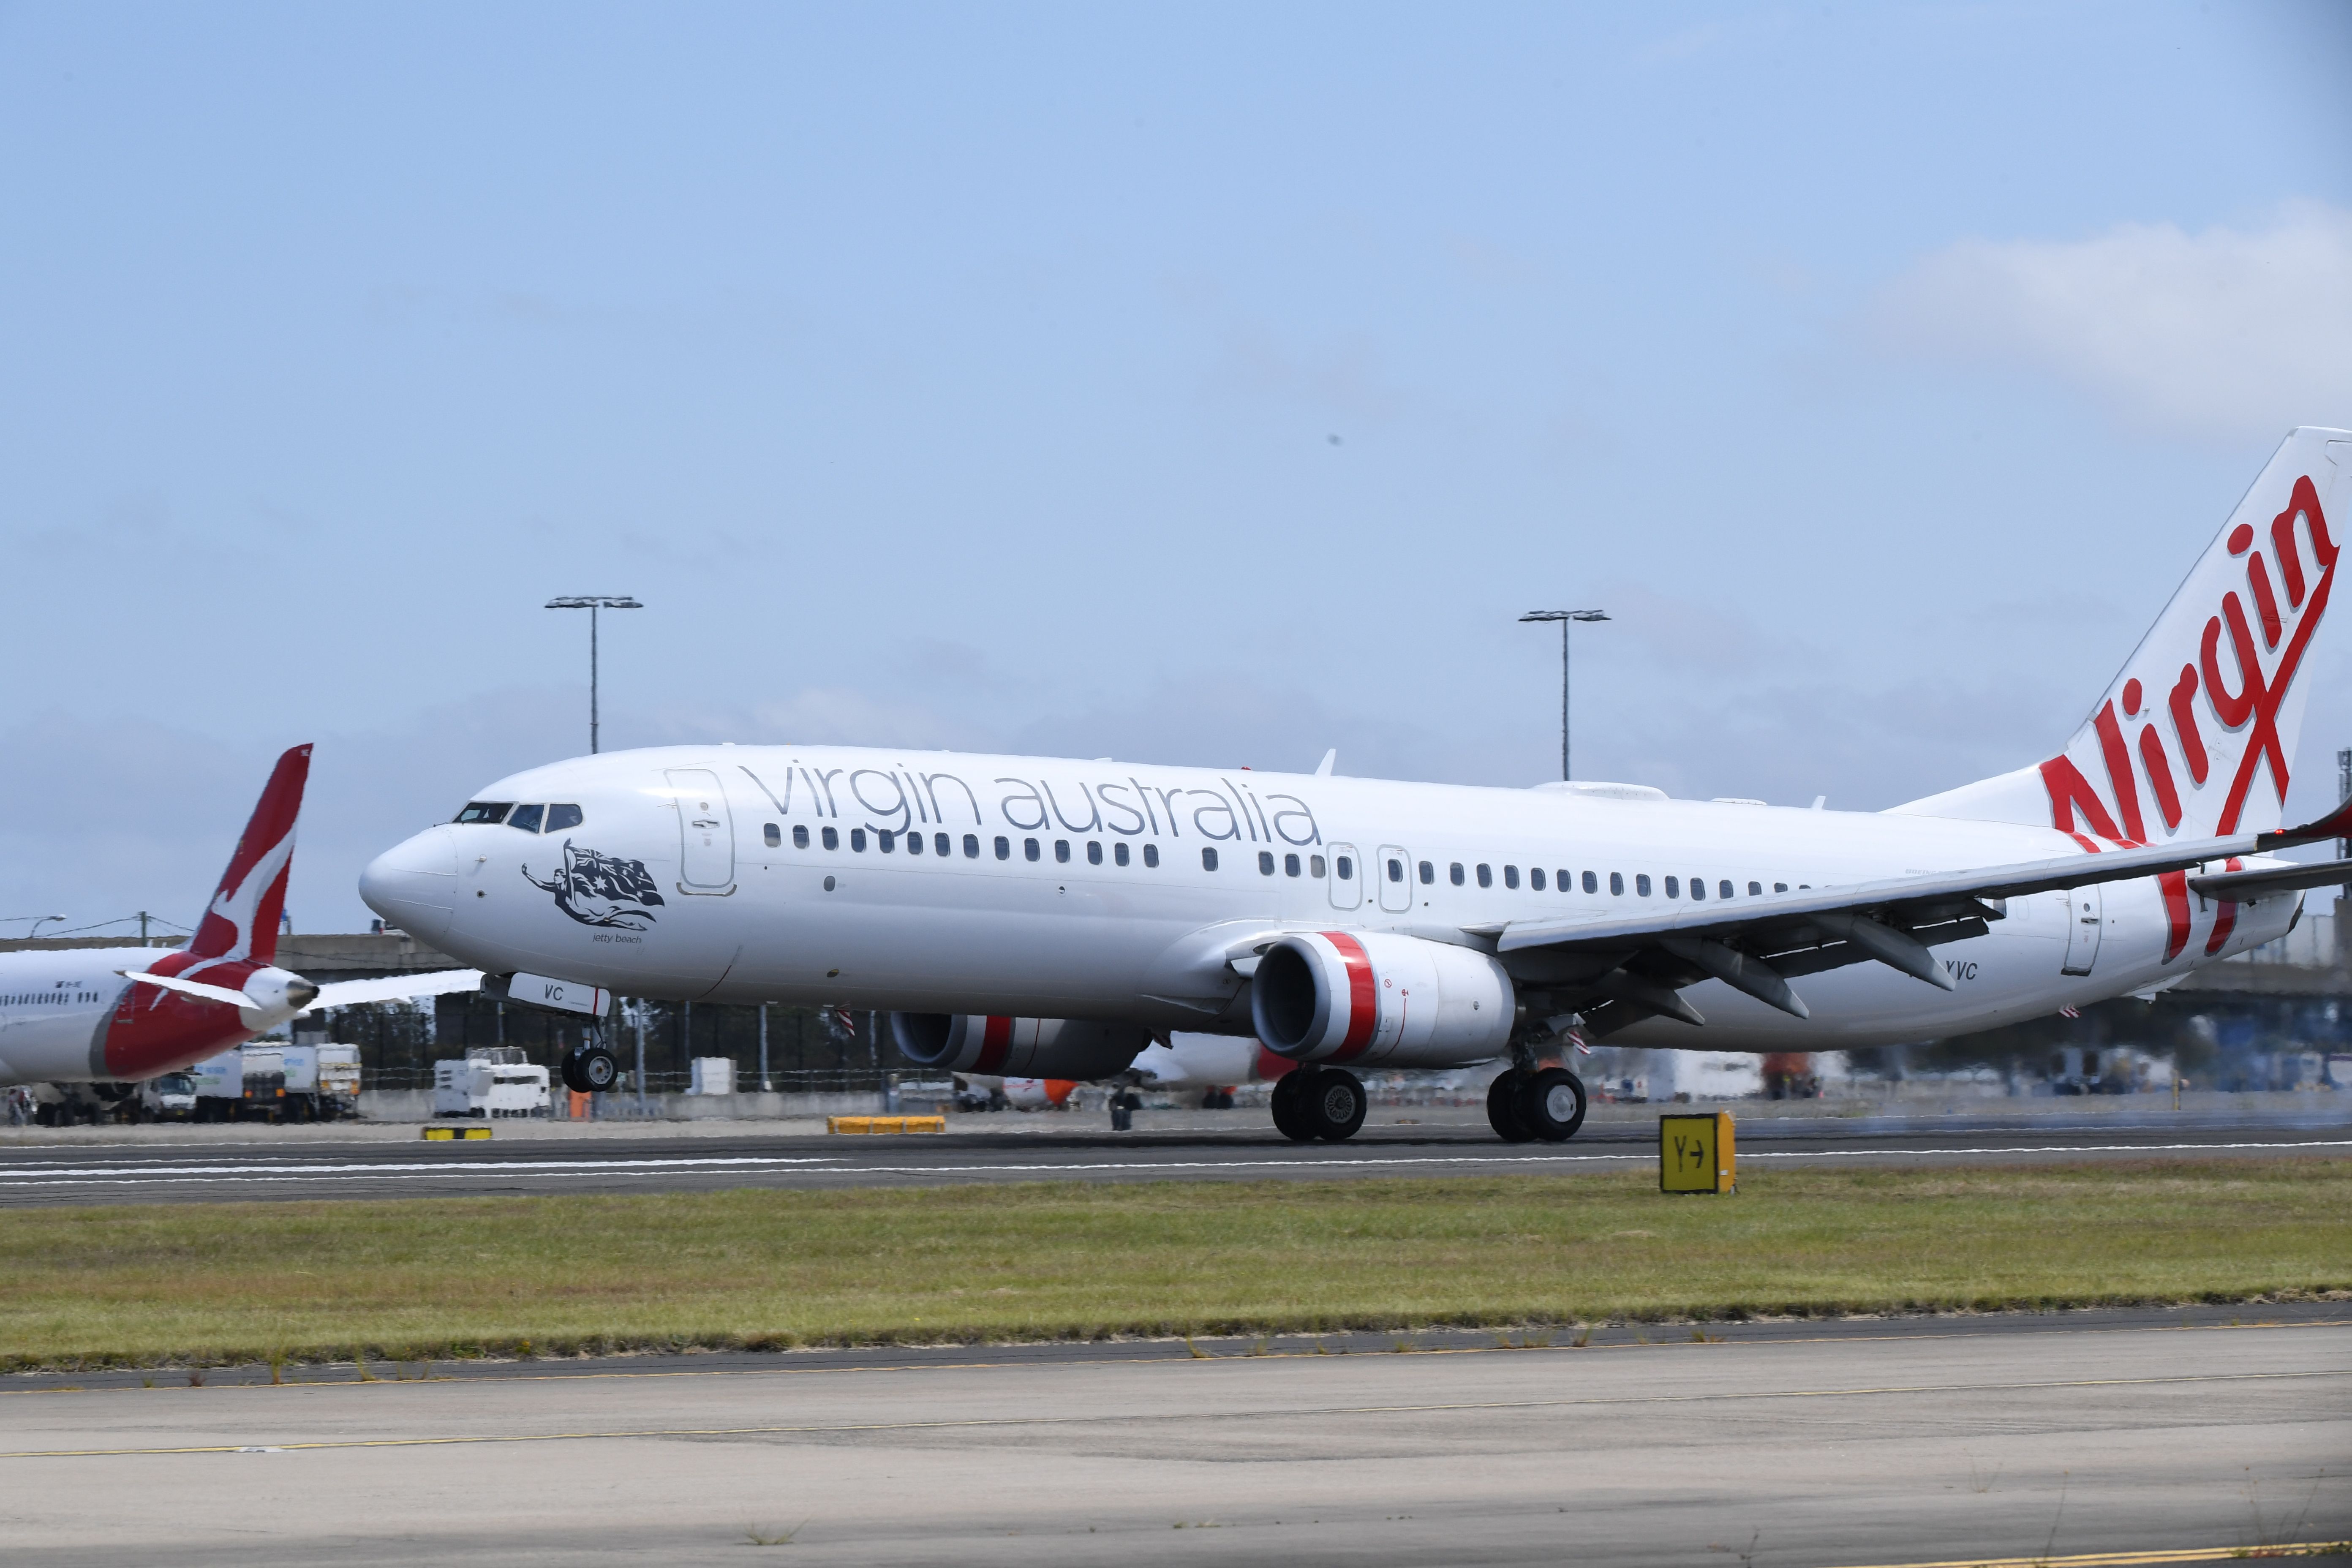 Virgin Australia will work with relevant agencies during the strike